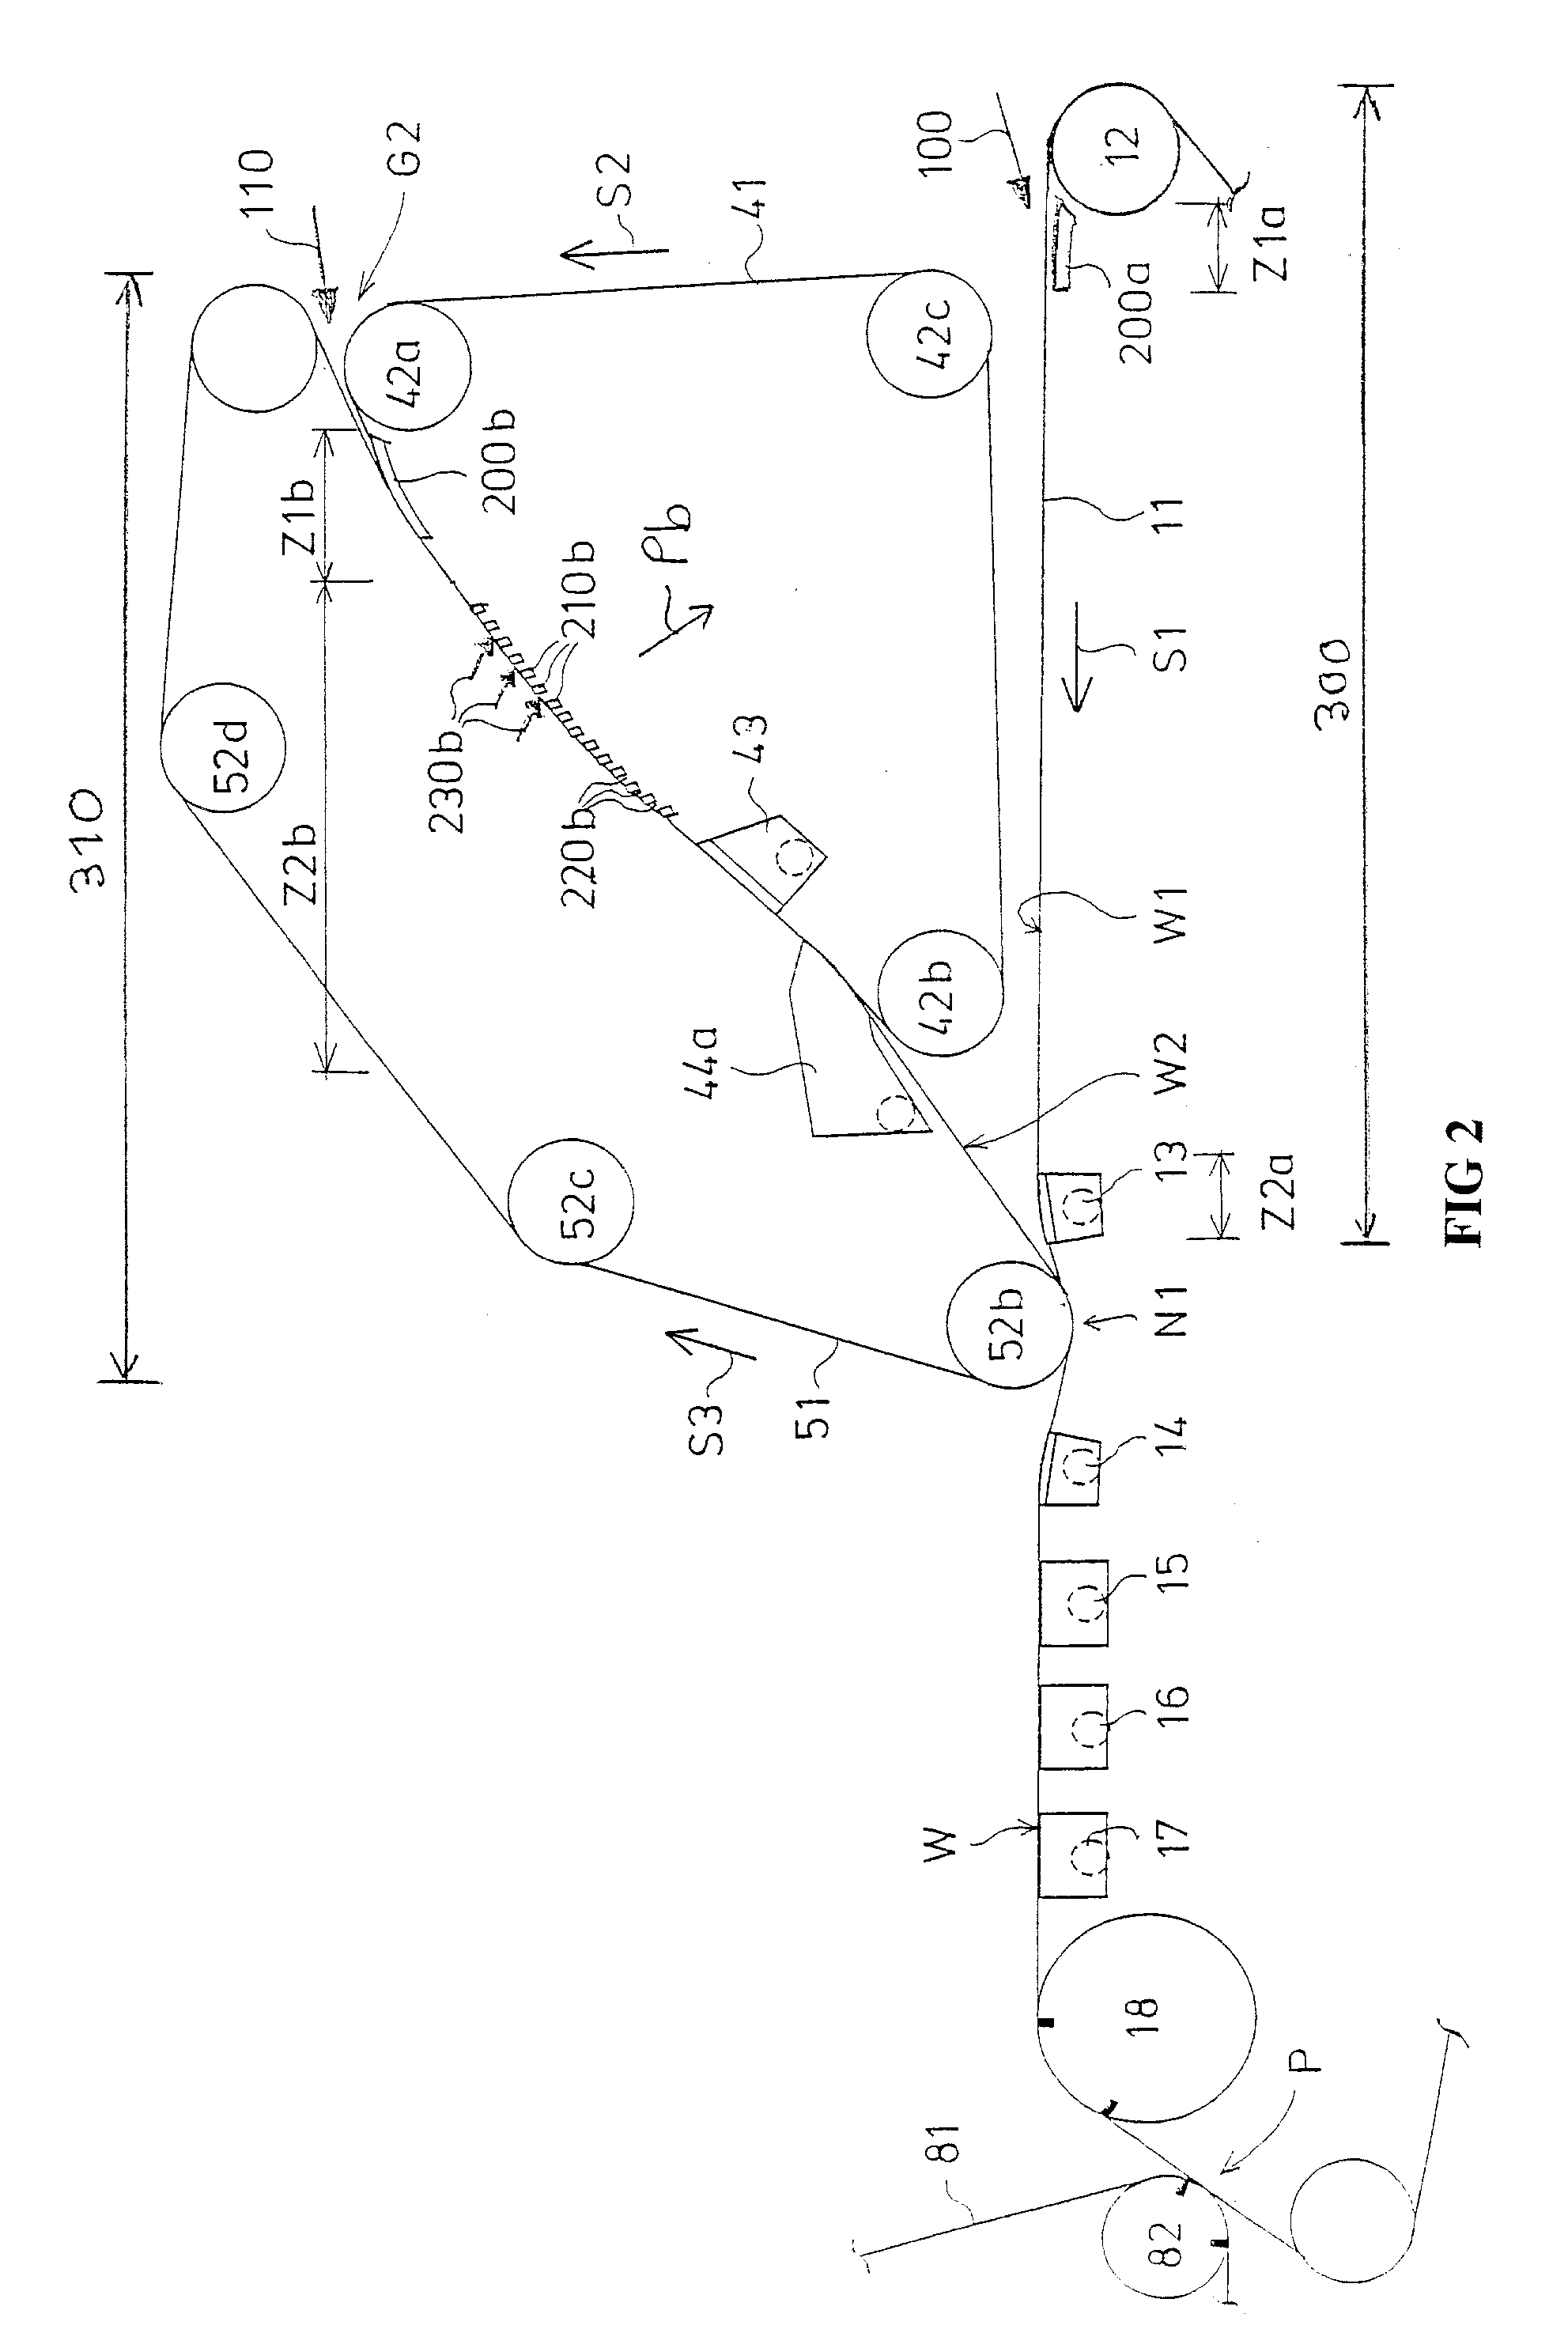 Multi-layer web formation section